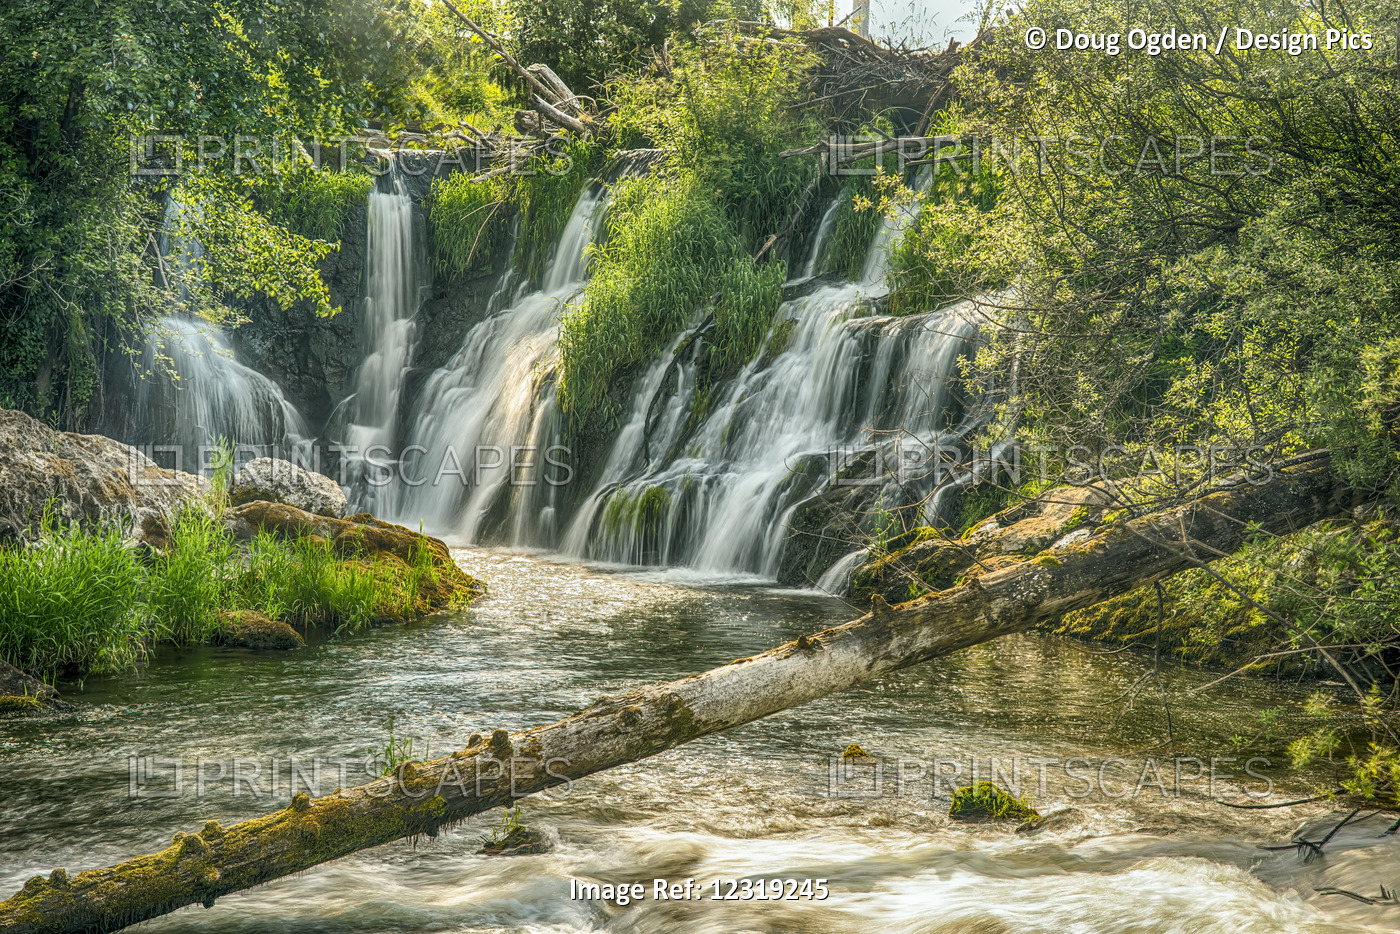 The Deschutes River Falls At The Base Of The Old Olympia Brewery, An Hdr Image ...